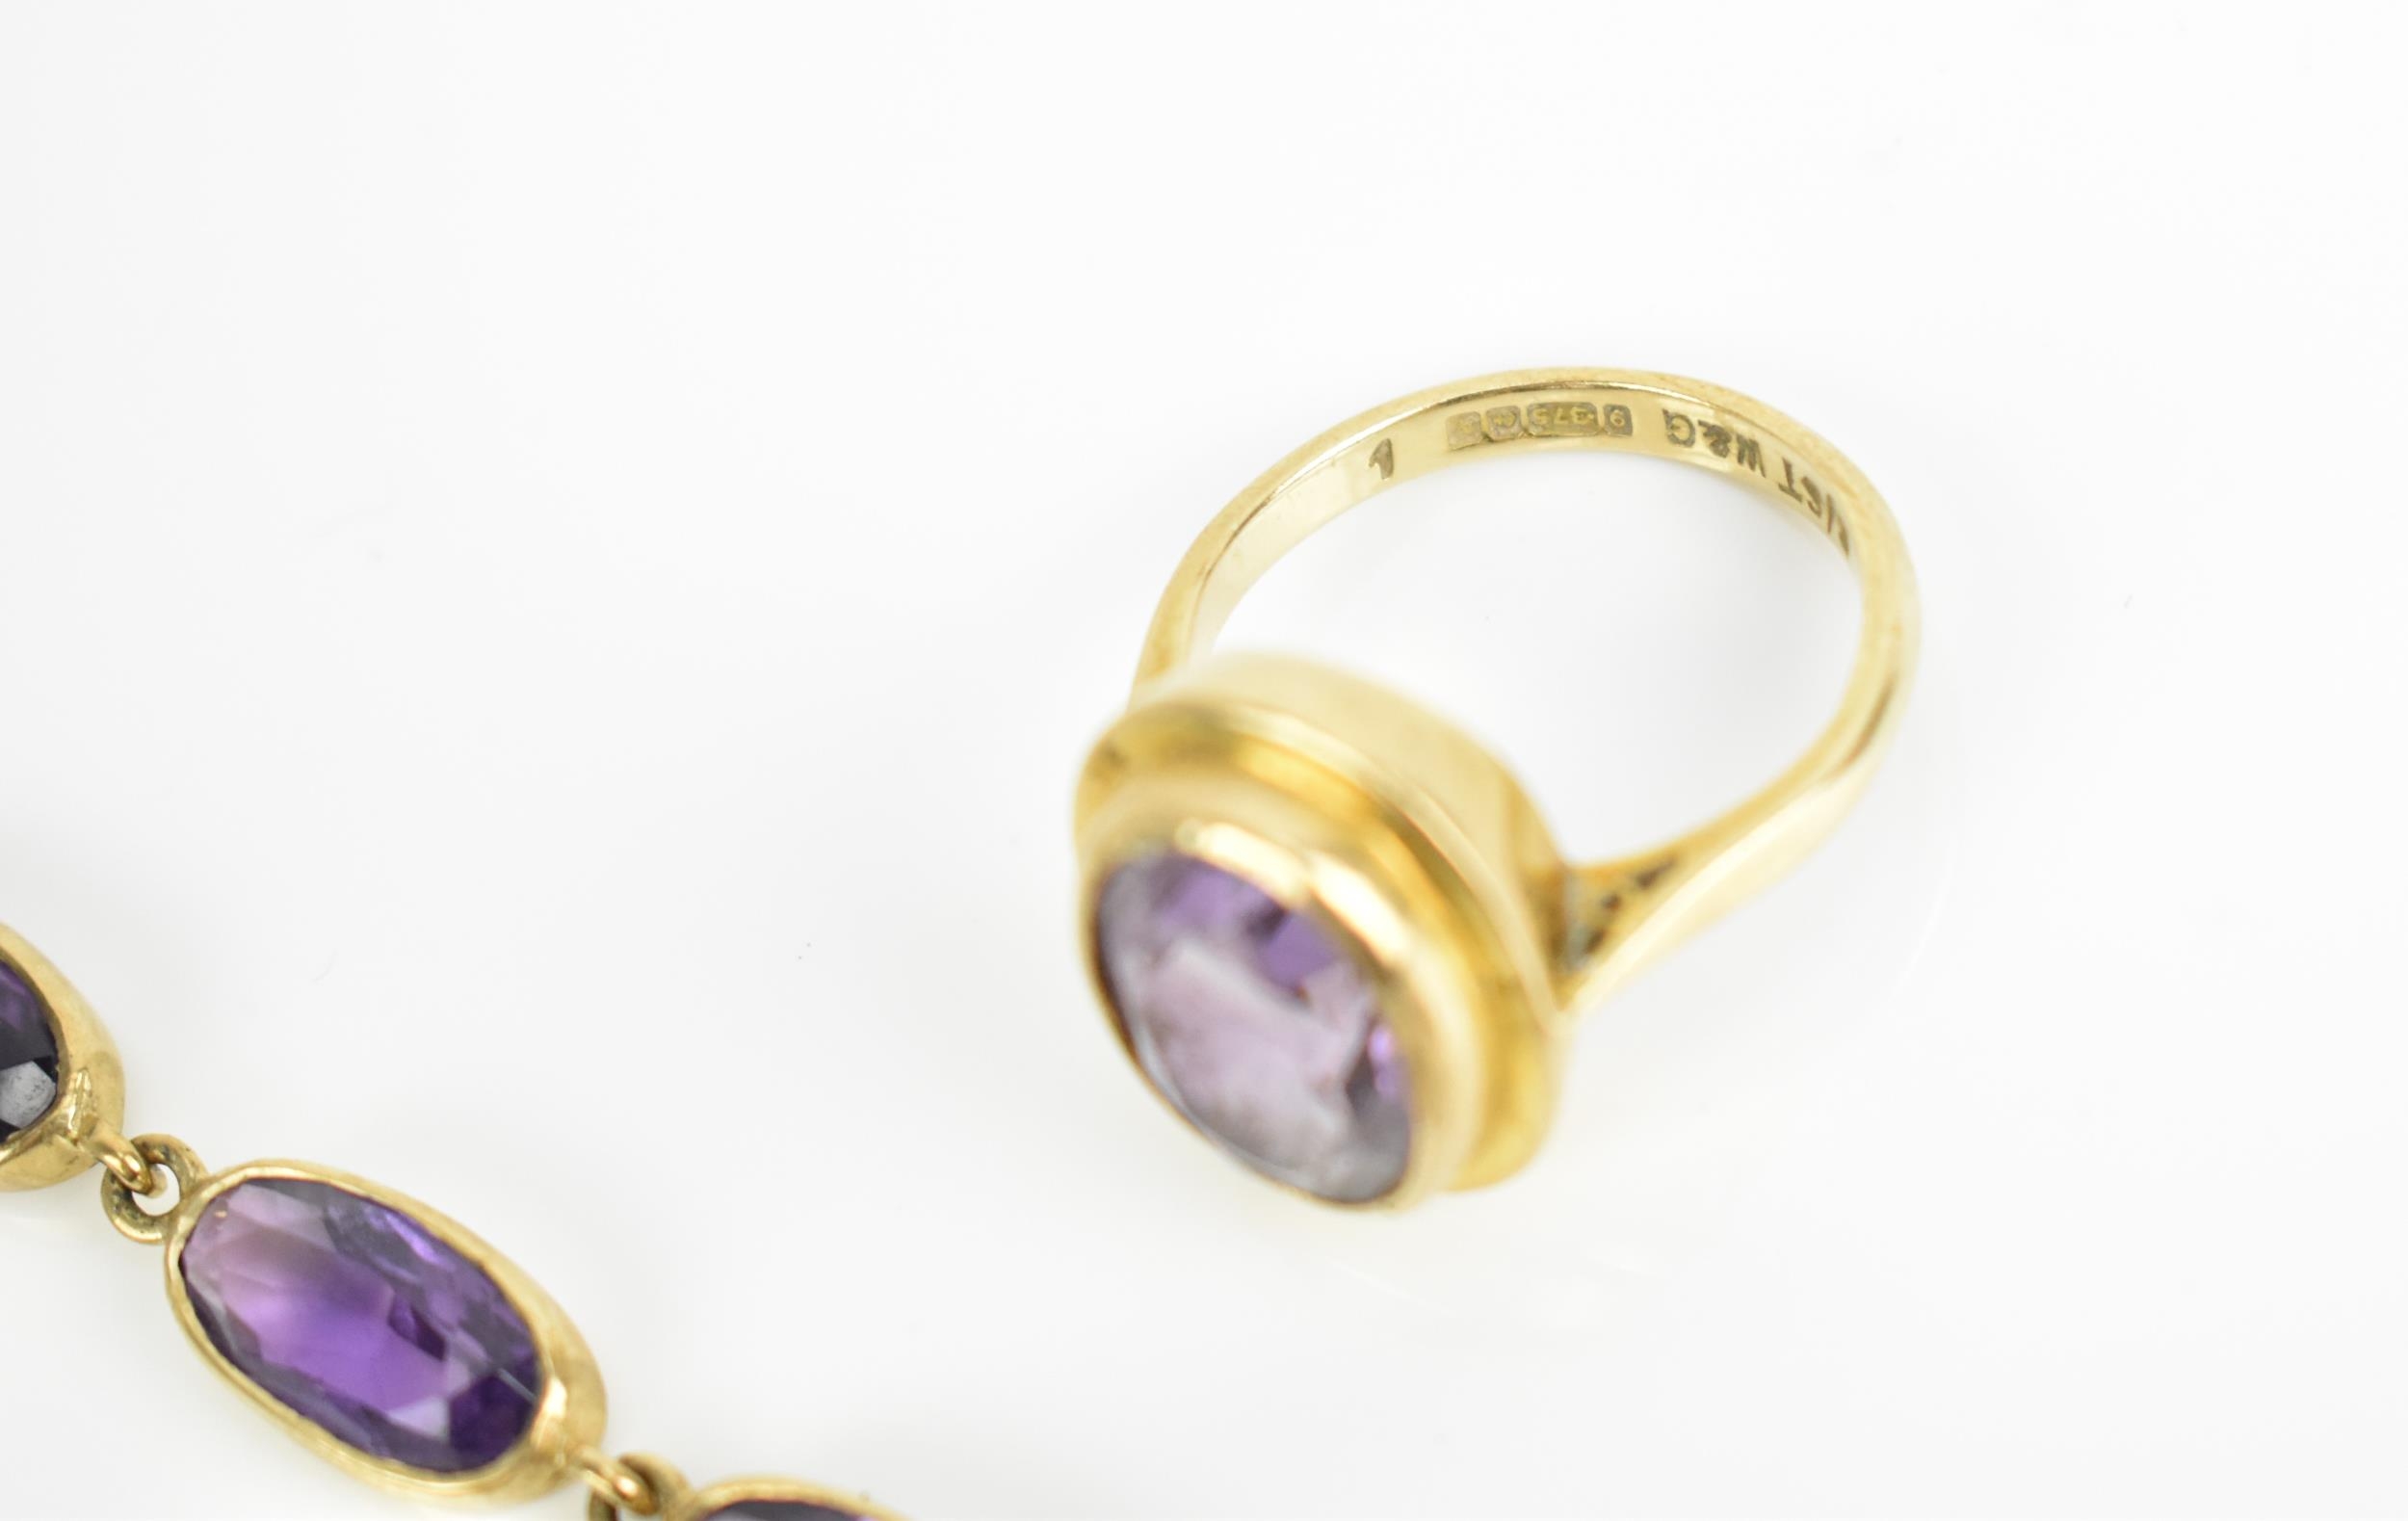 A 9ct yellow gold and amethyst bracelet, the stones in spectacle setting, linked with hoops and - Image 3 of 6